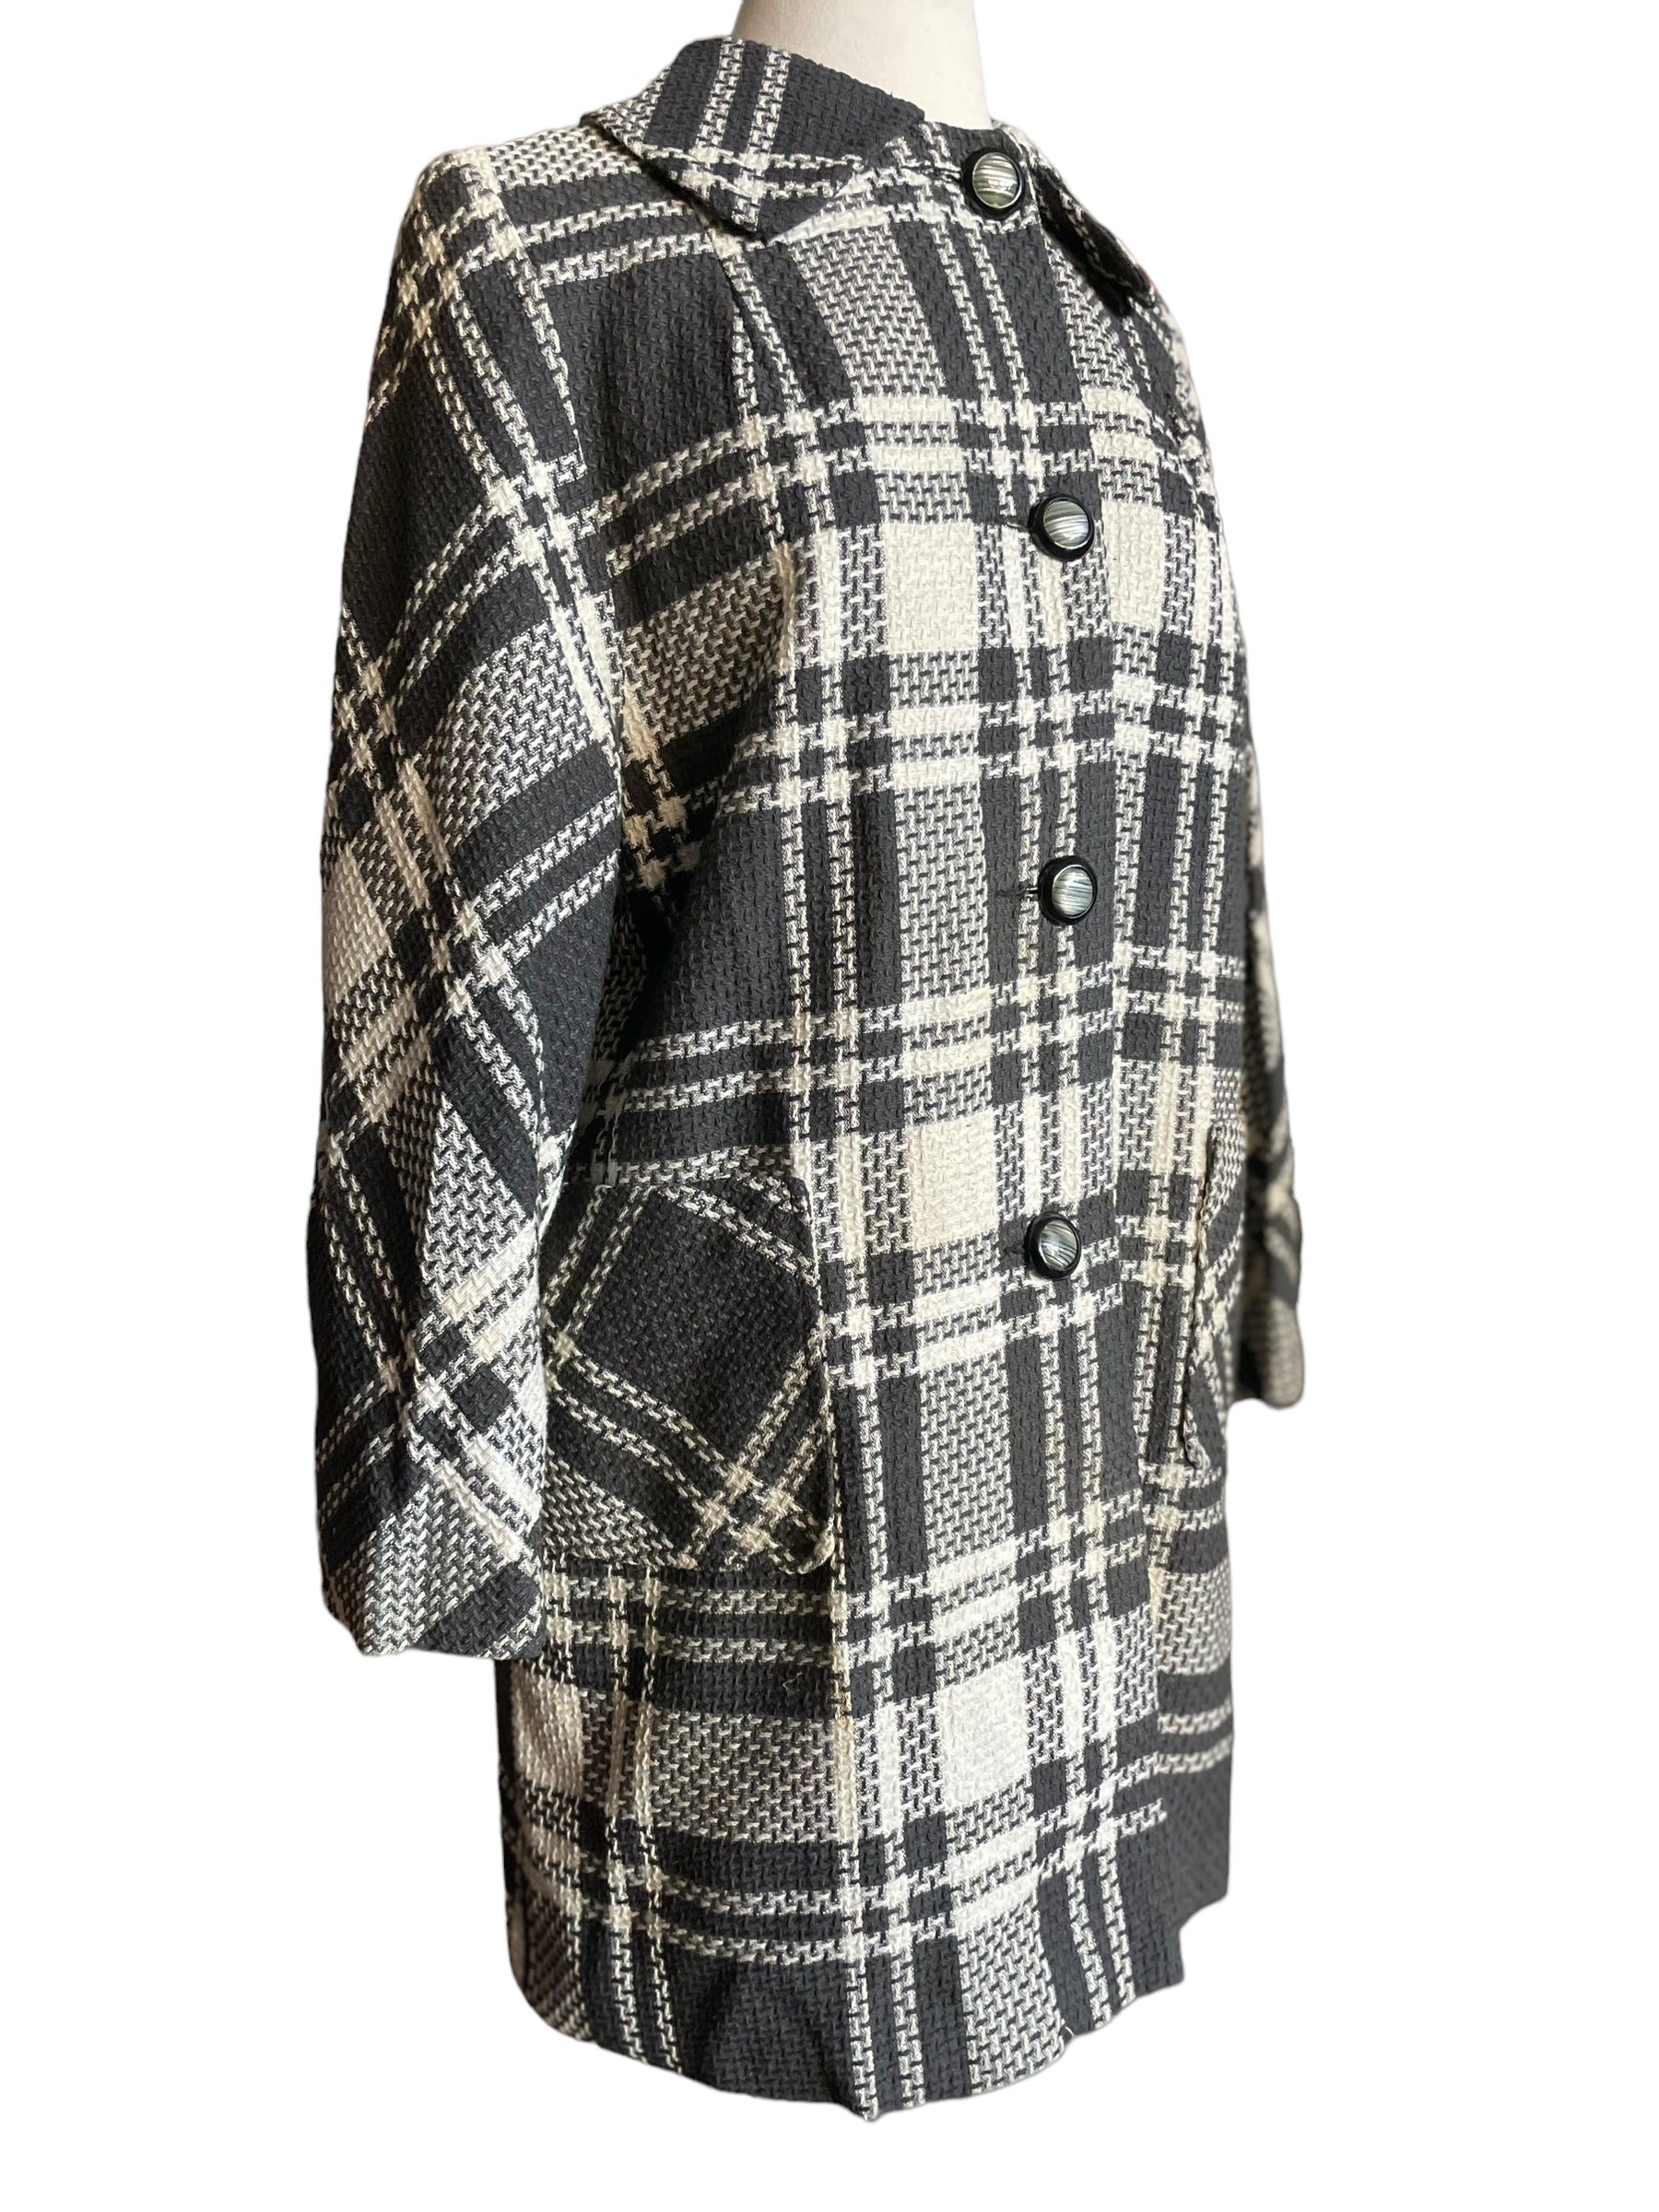 Right side full view of Vintage 1960s Black and White Plaid Coat | Barn Owl Ladies Coats | Seattle True Vintage